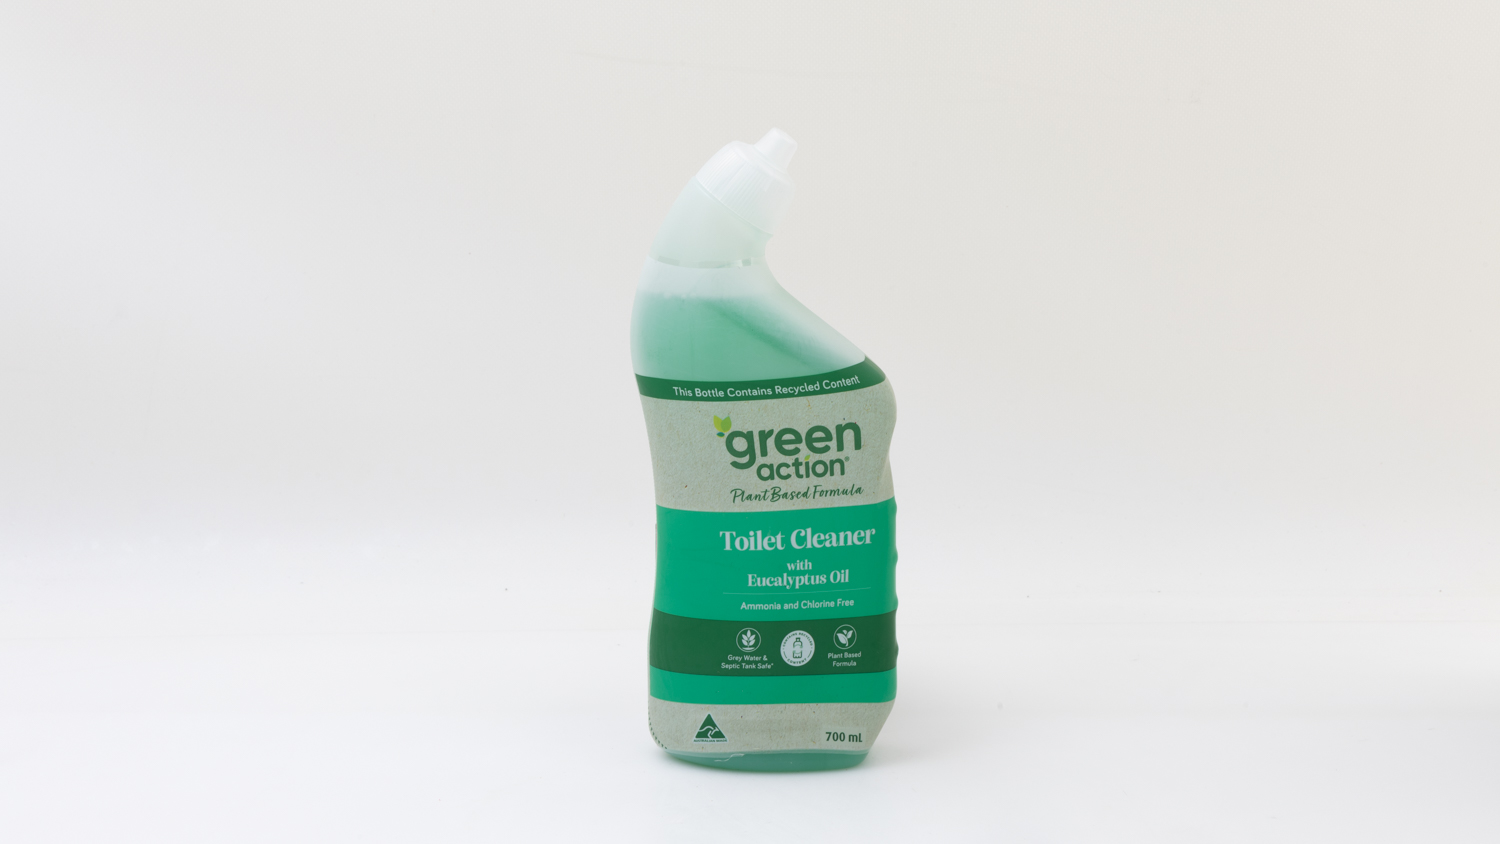 Aldi Green Action Toilet Cleaner with Eucalyptus Oil carousel image